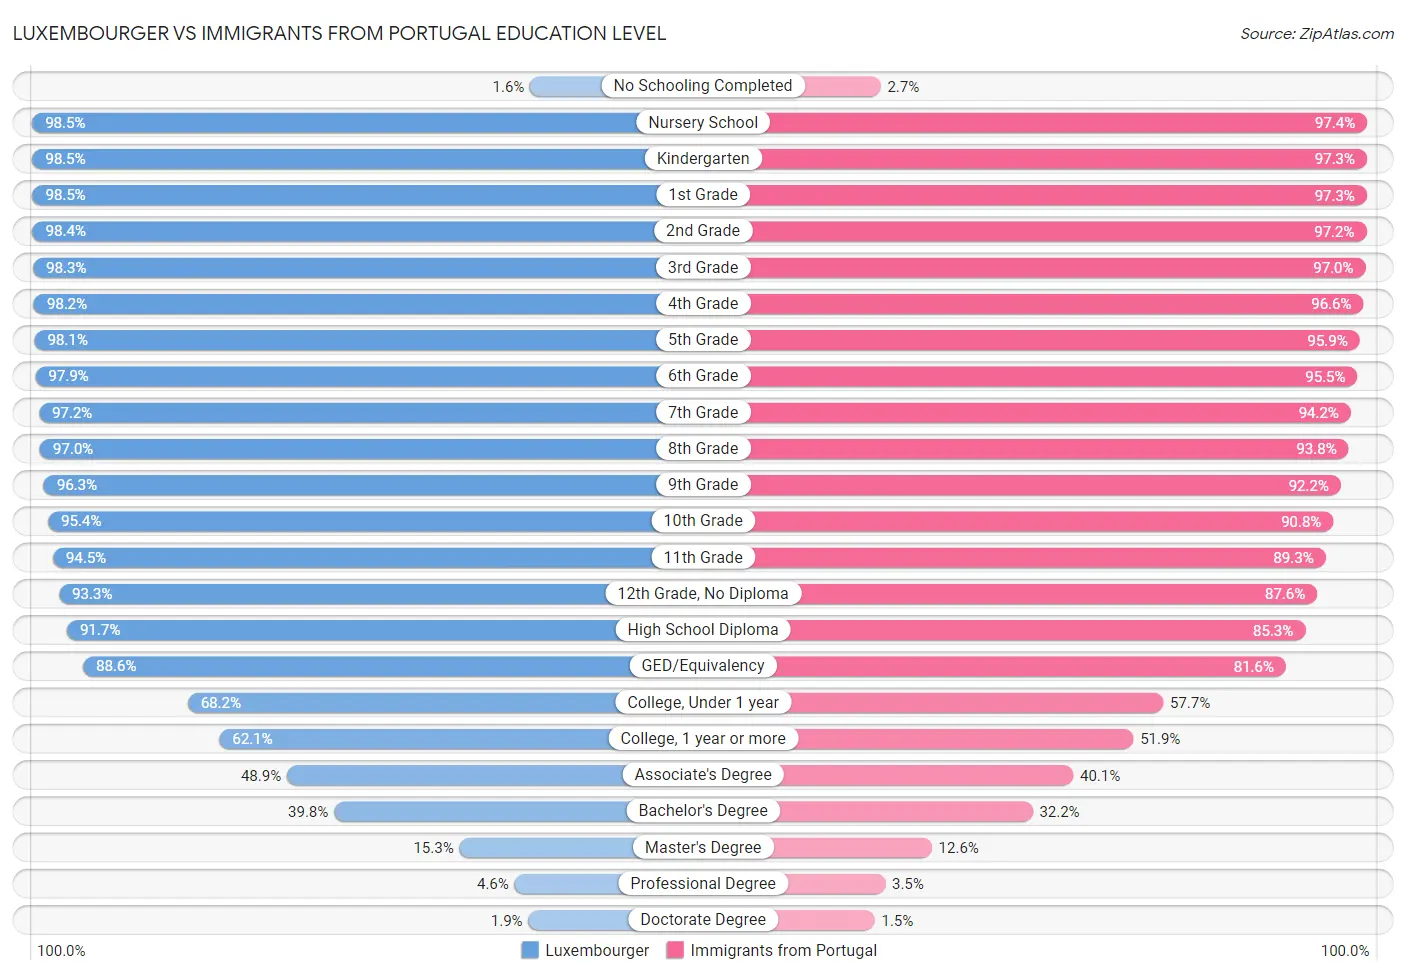 Luxembourger vs Immigrants from Portugal Education Level